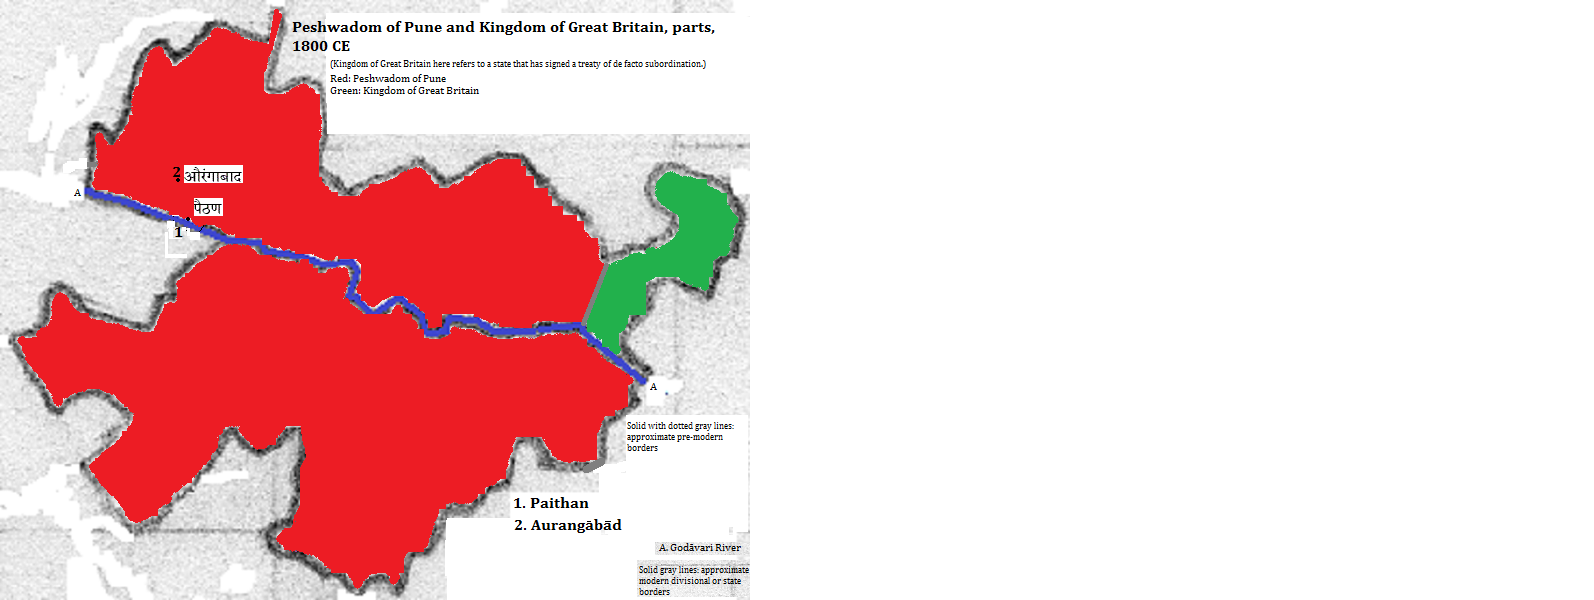 map showing parts of the Peshwadom of Pune (Peshwa) and the Kingdom of Great Britain (British Empire), 1800 CE